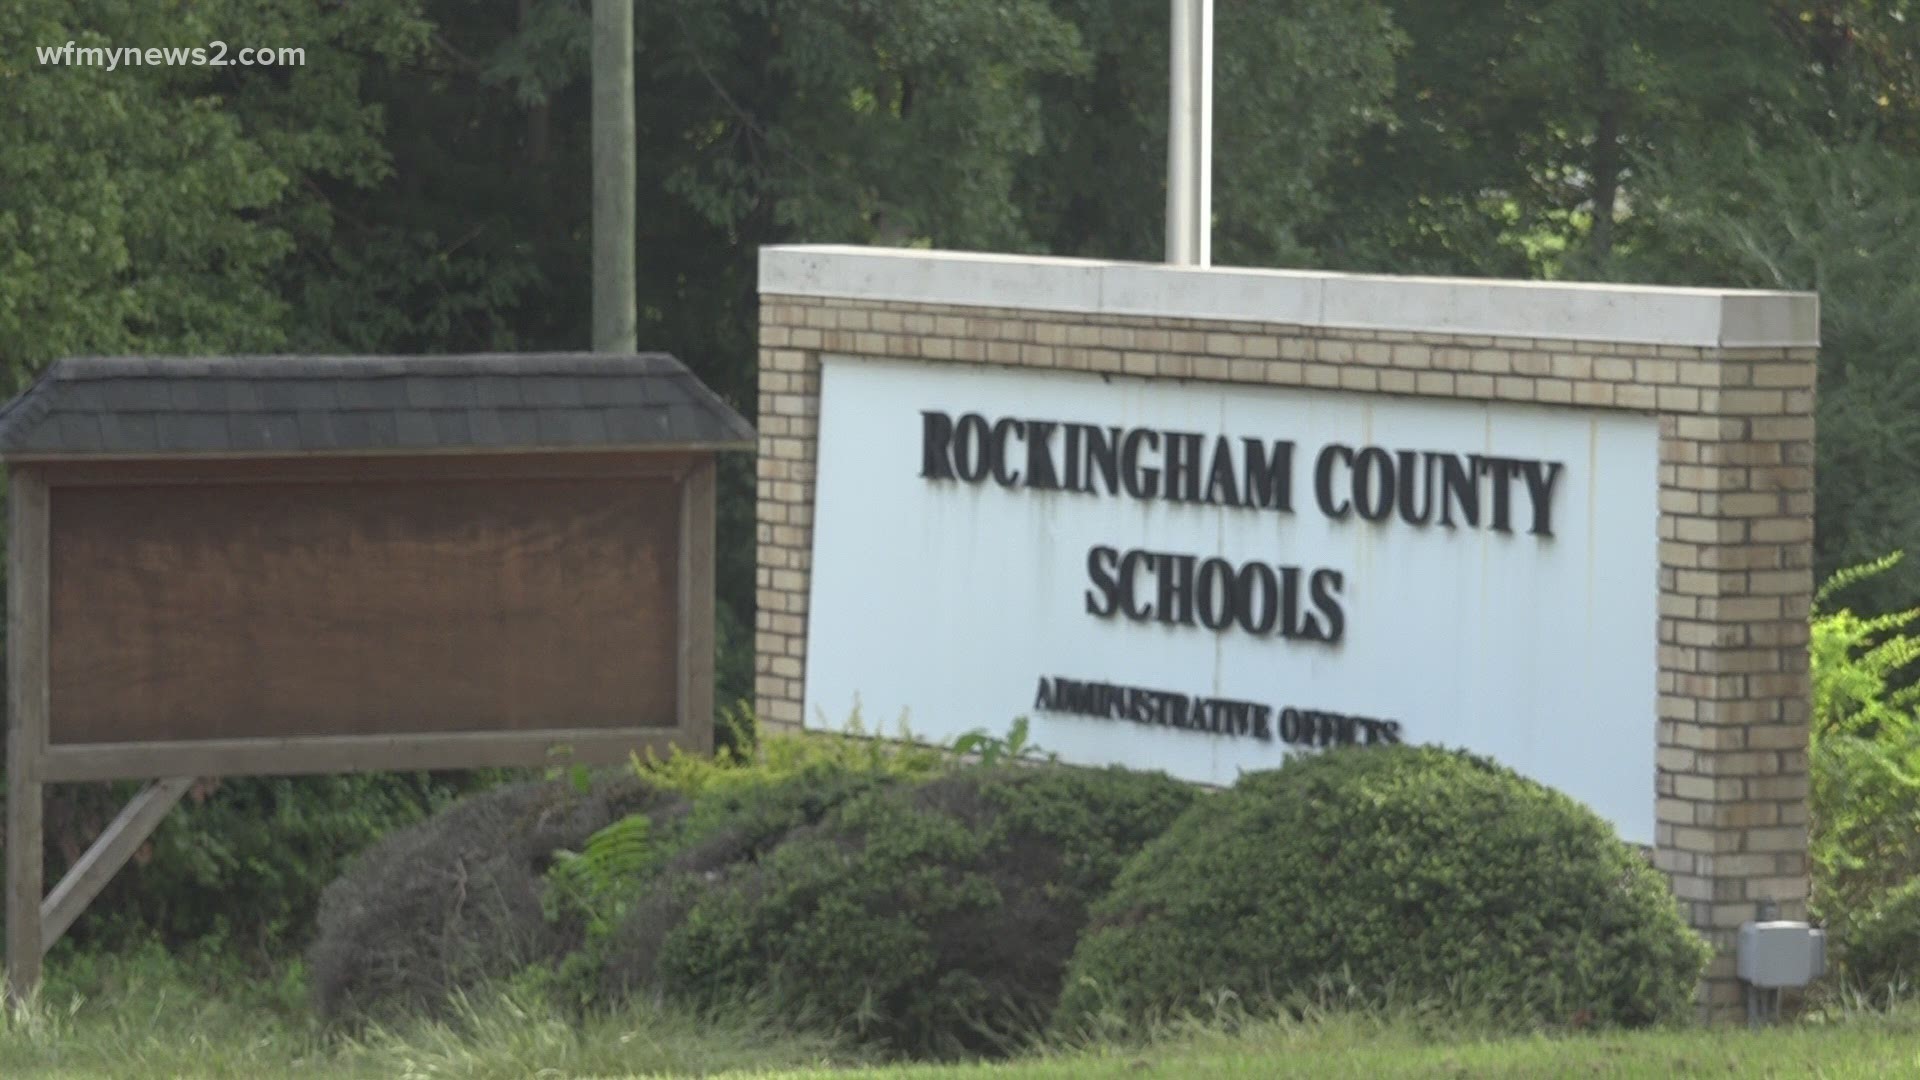 Rockingham County students are back in classrooms September 21. School officials discuss how they’re preparing for a safe year.